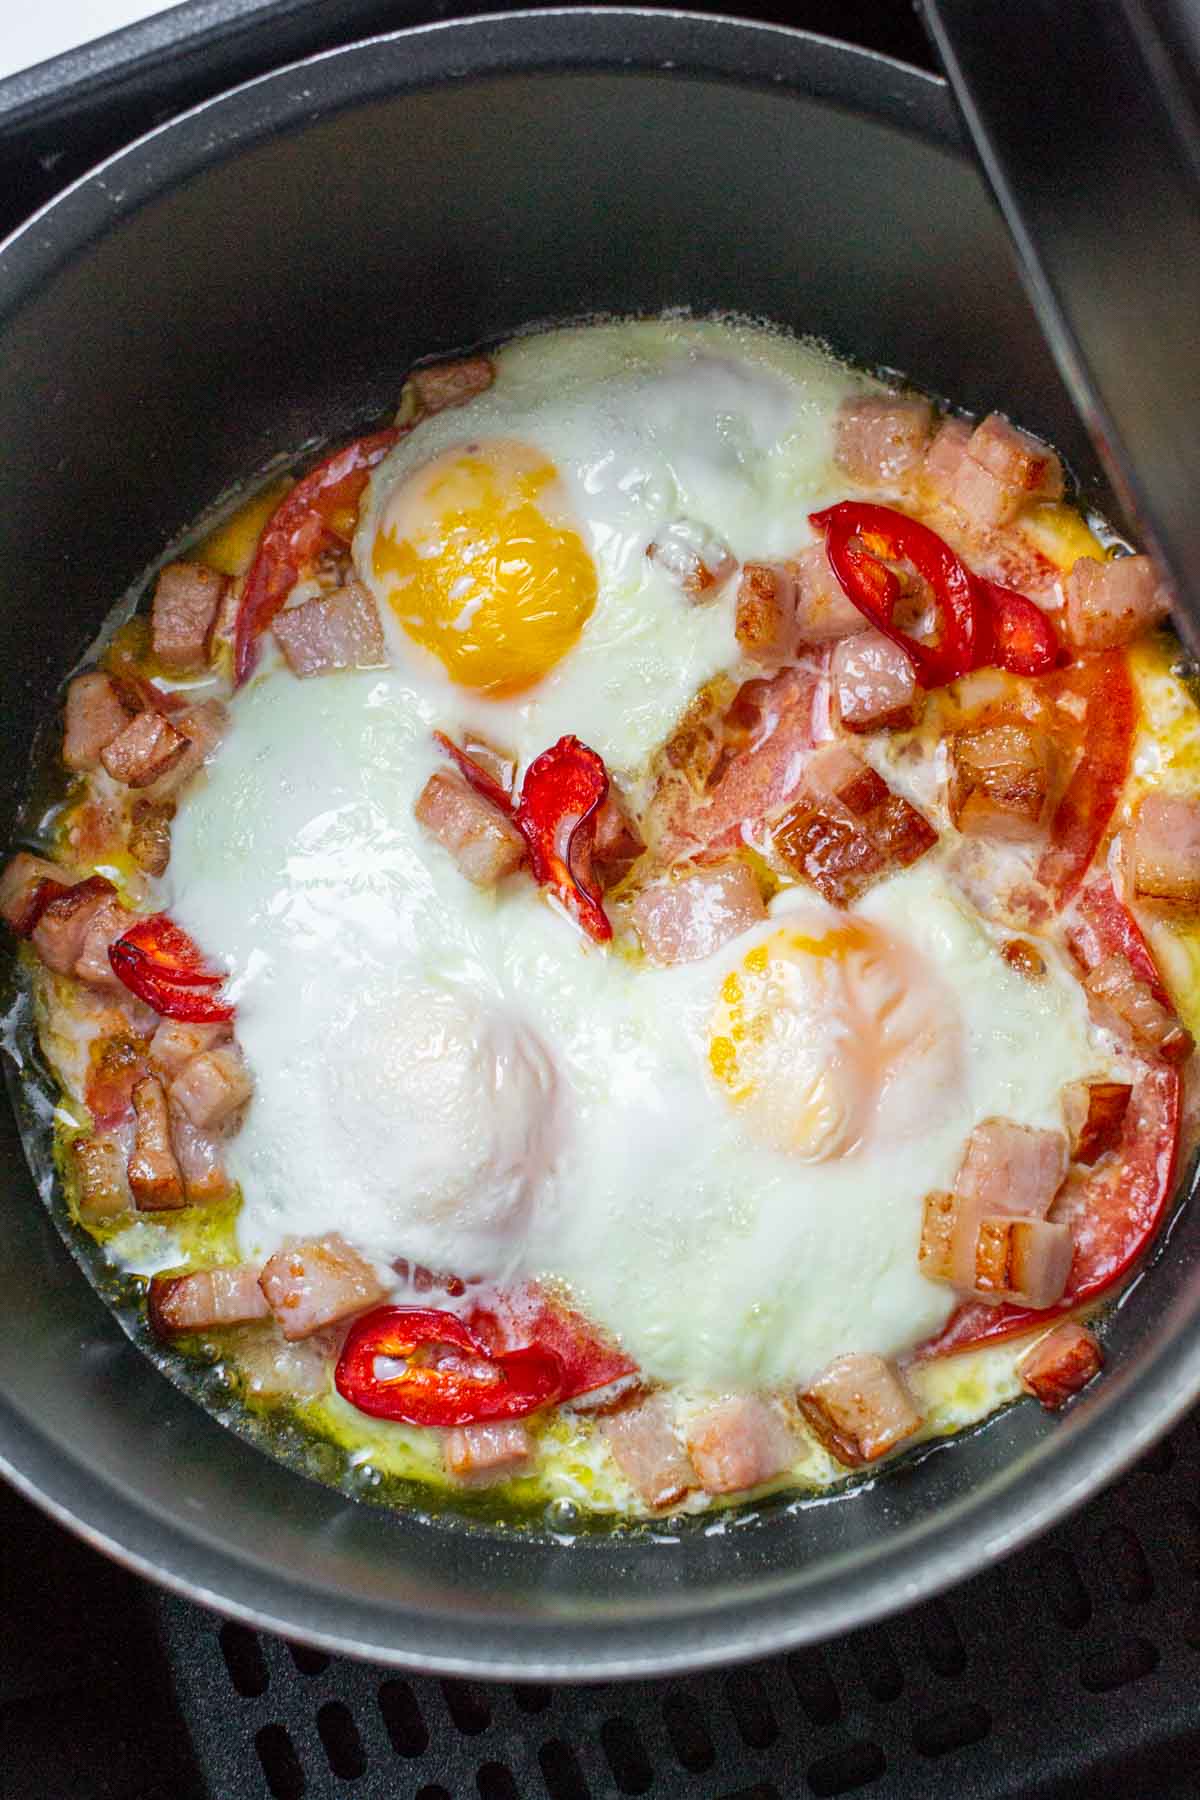 Fried Eggs With Bacon and Red peppers in Air Fryer.